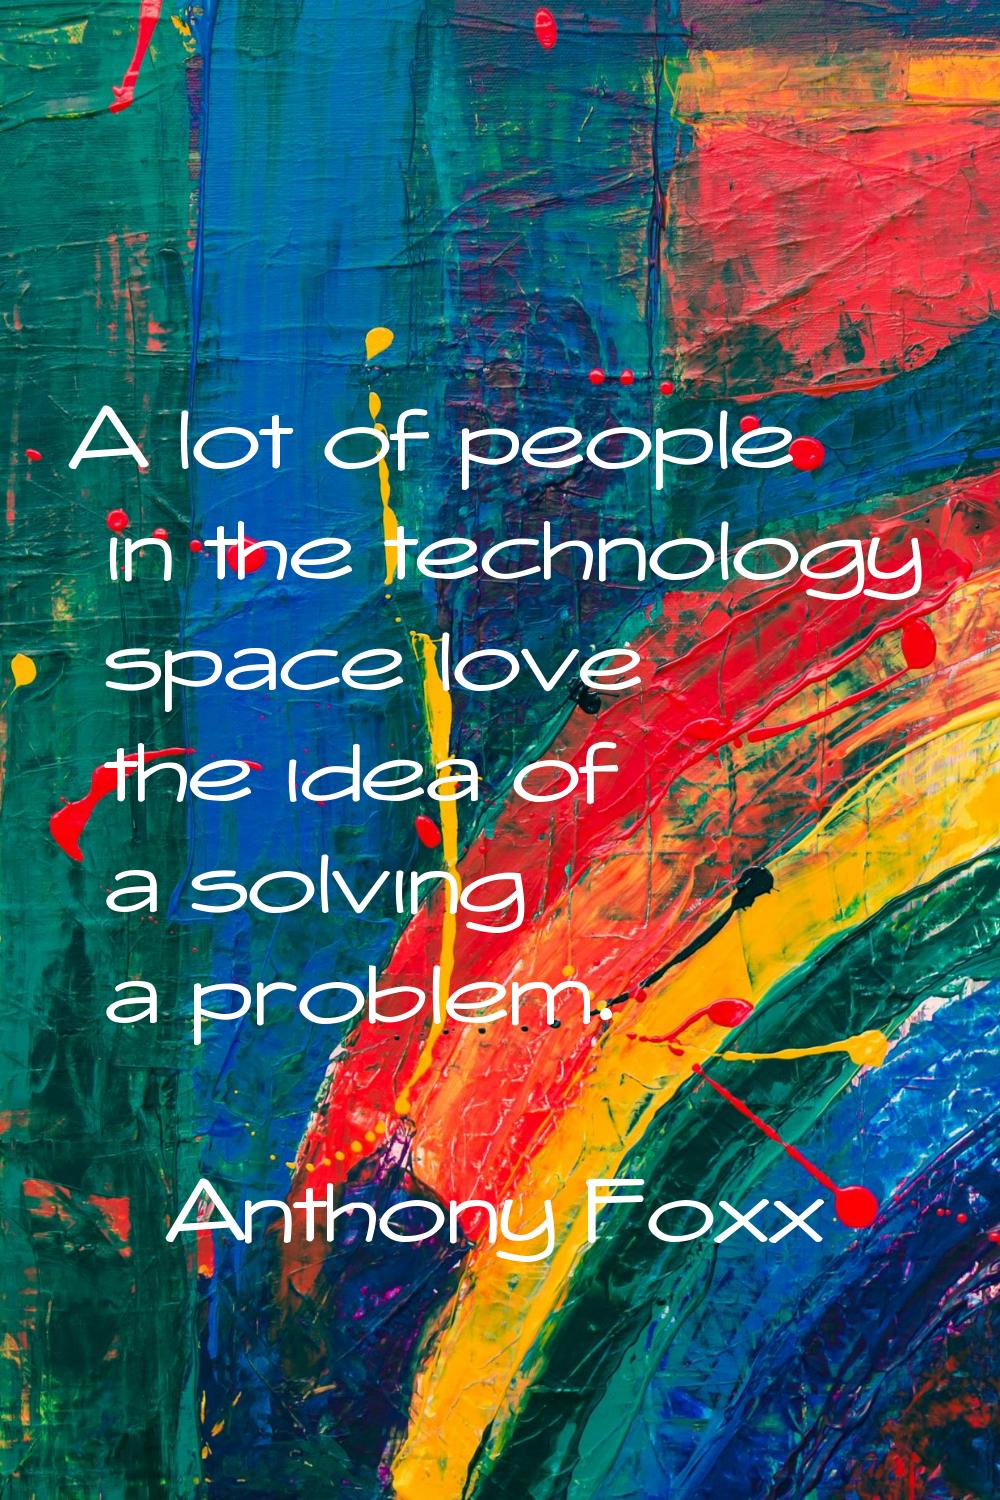 A lot of people in the technology space love the idea of a solving a problem.